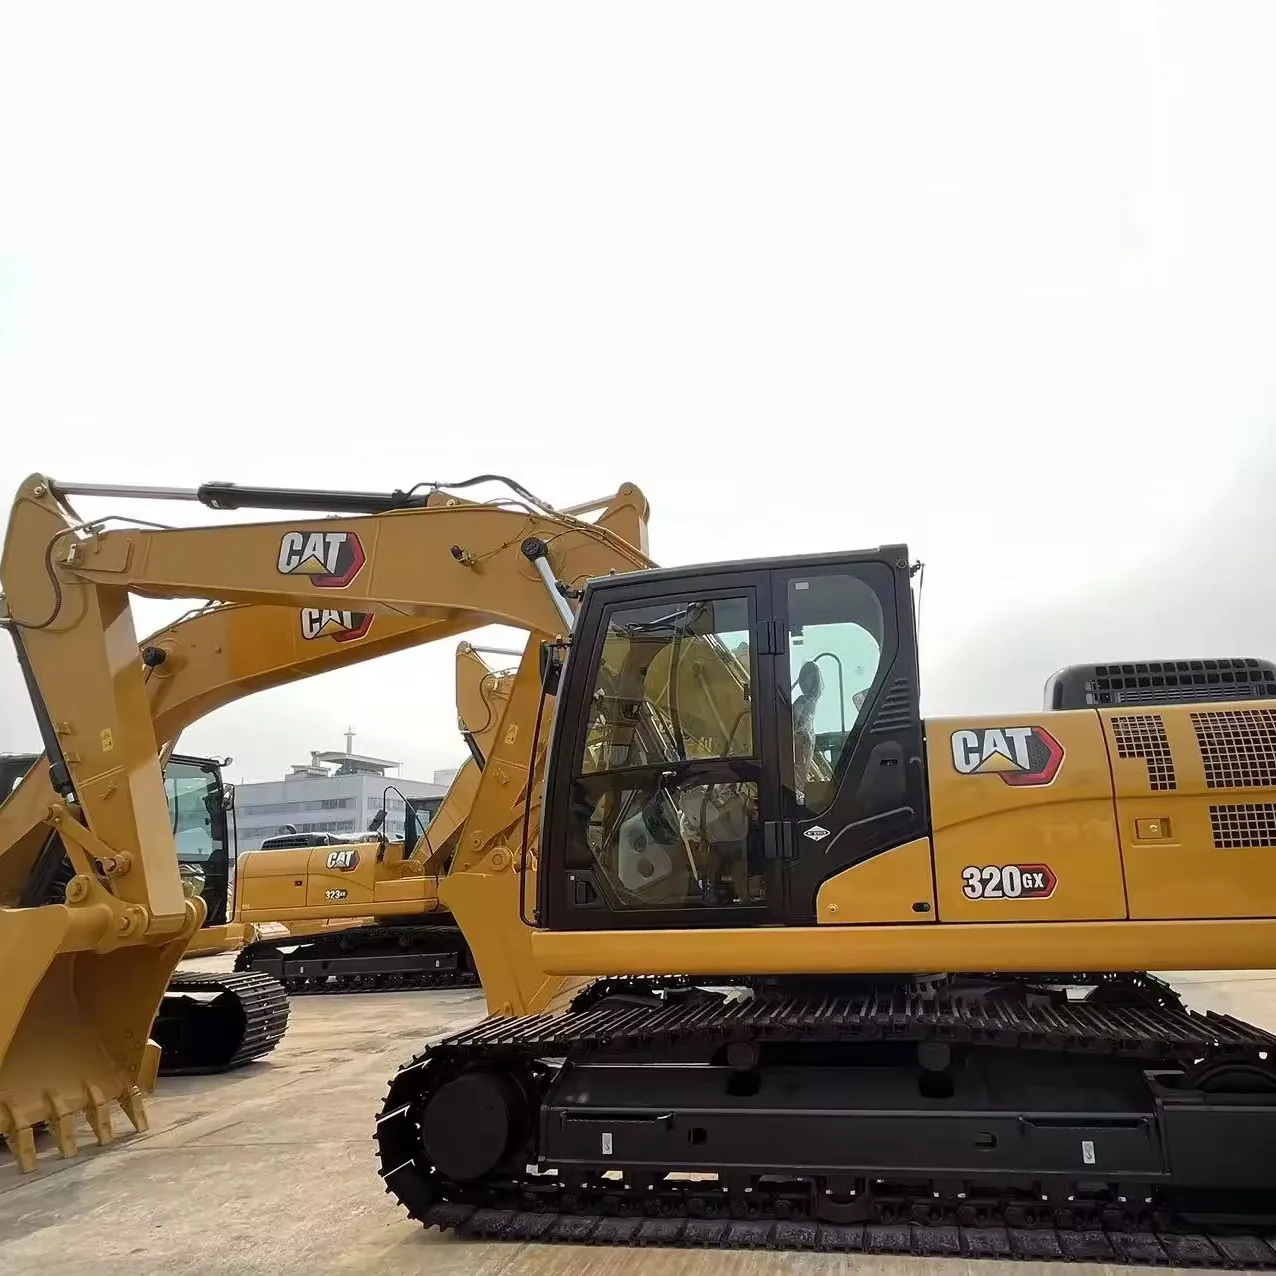 Cheap price New CAT 320GX Excavator 20 Tons Digger Machinery Japan Pump Excavator in good condition with sale price in China